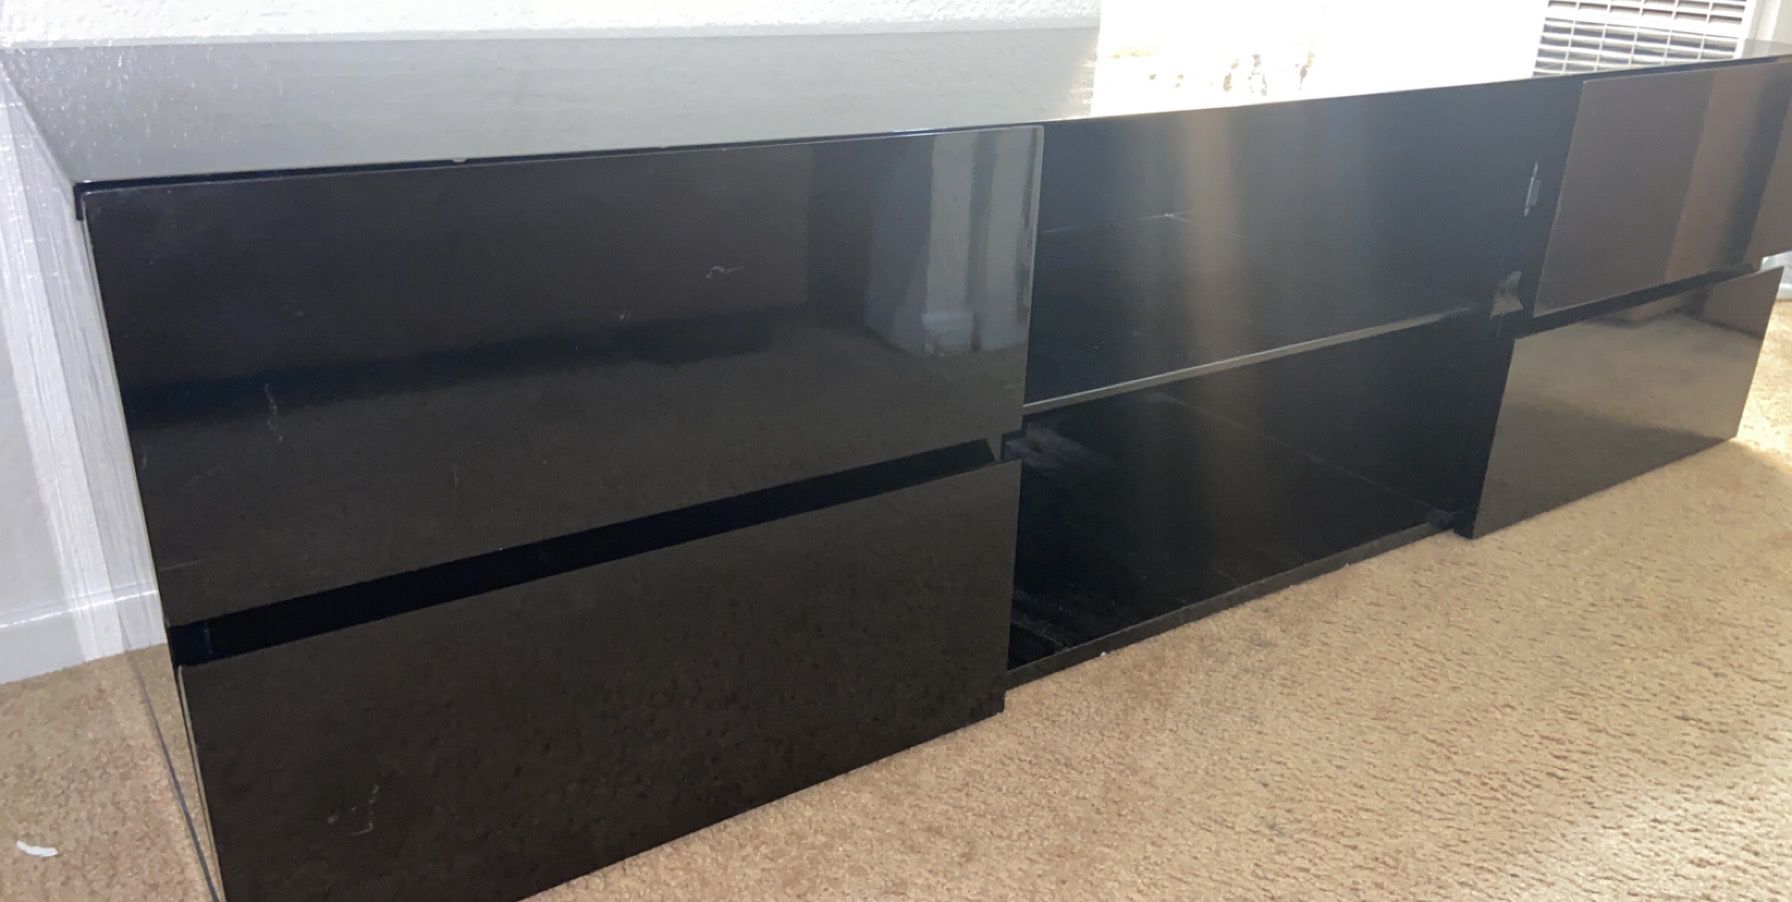 Black modern T.V stand with shelving and storage space. ‘55 wide.